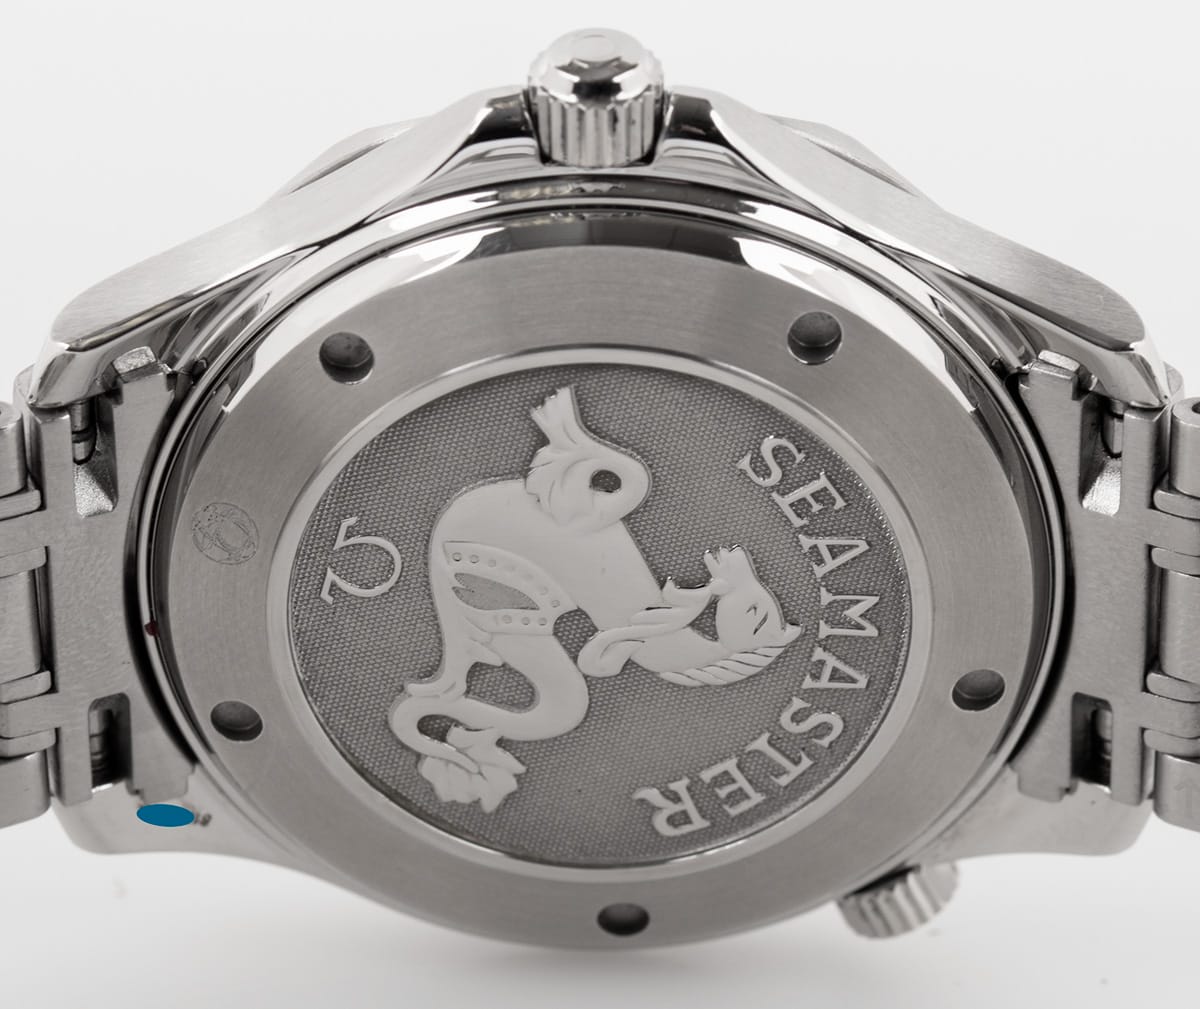 Caseback of Seamaster Professional Co-Axial